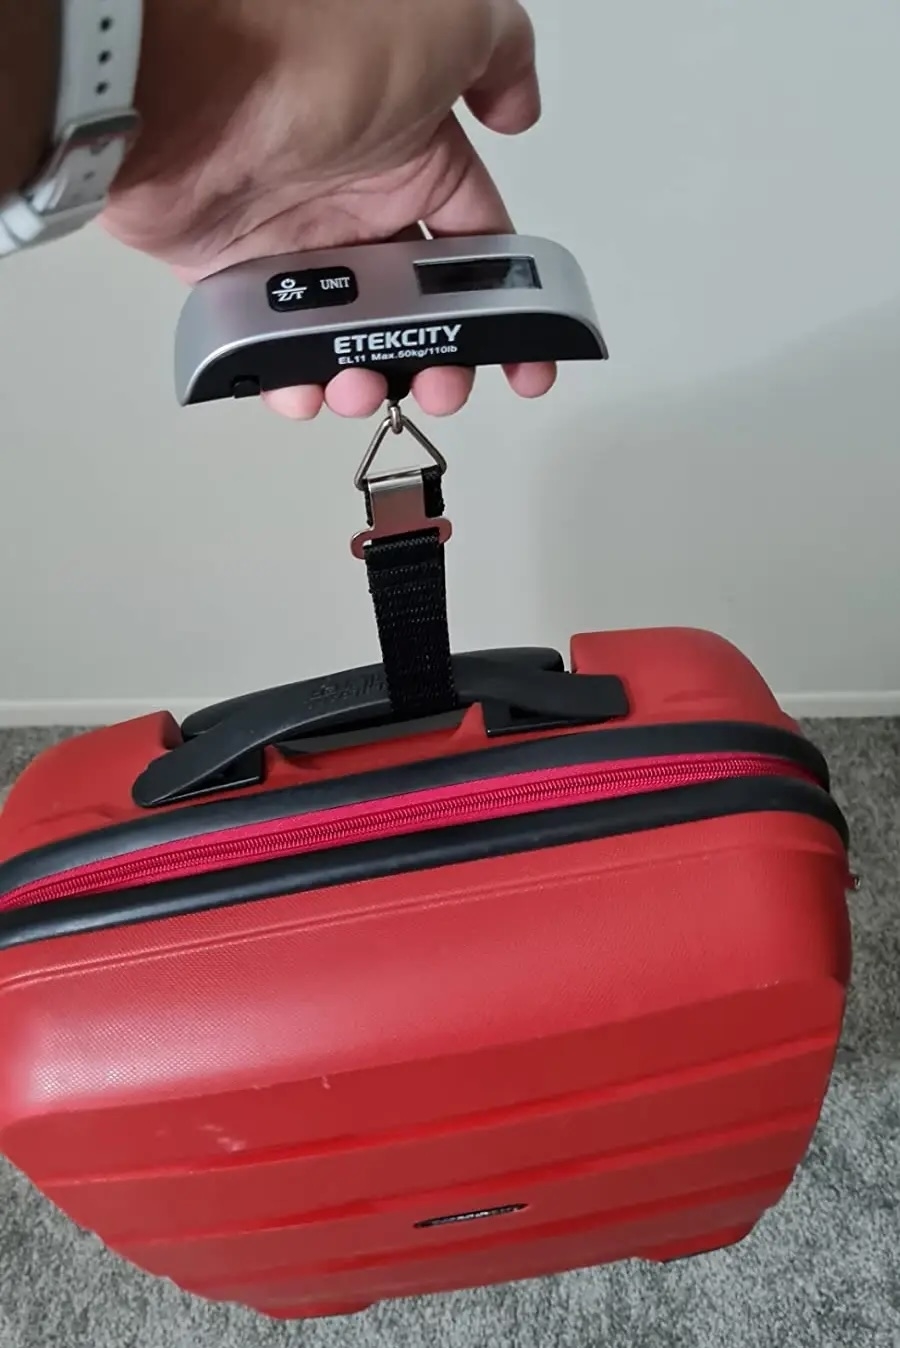 Person using a portable digital luggage scale to weigh a red suitcase